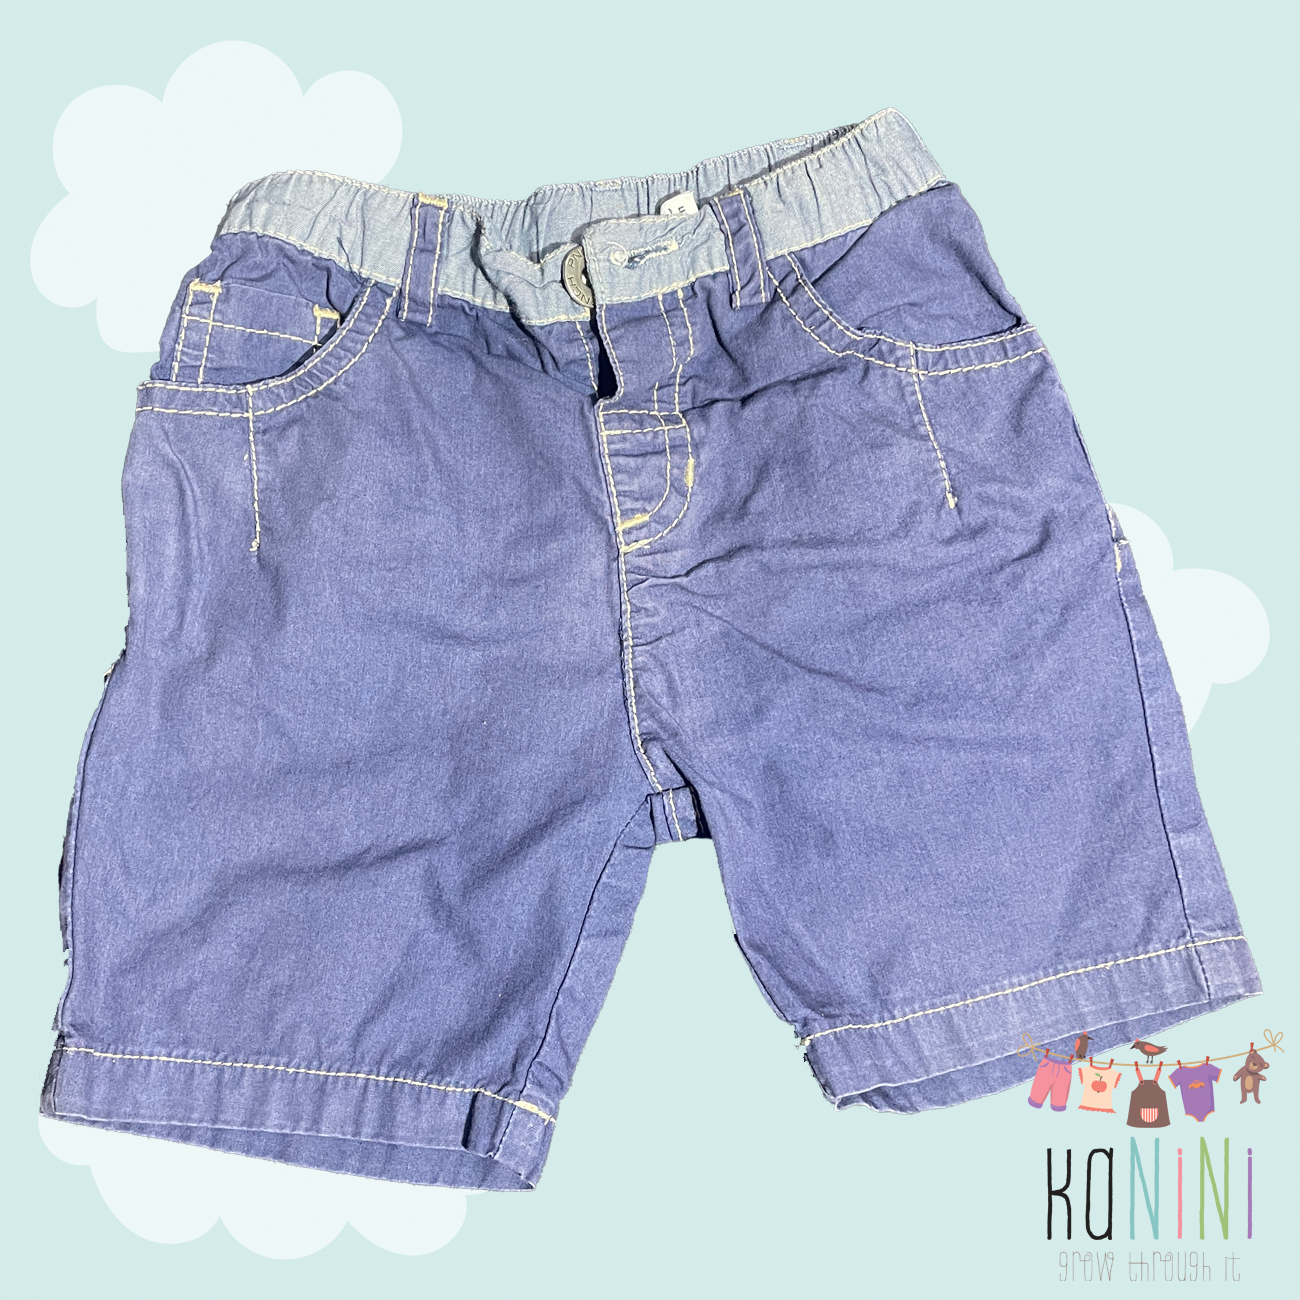 Featured image for “Panco 6 - 12 Months Boys Blue Shorts”